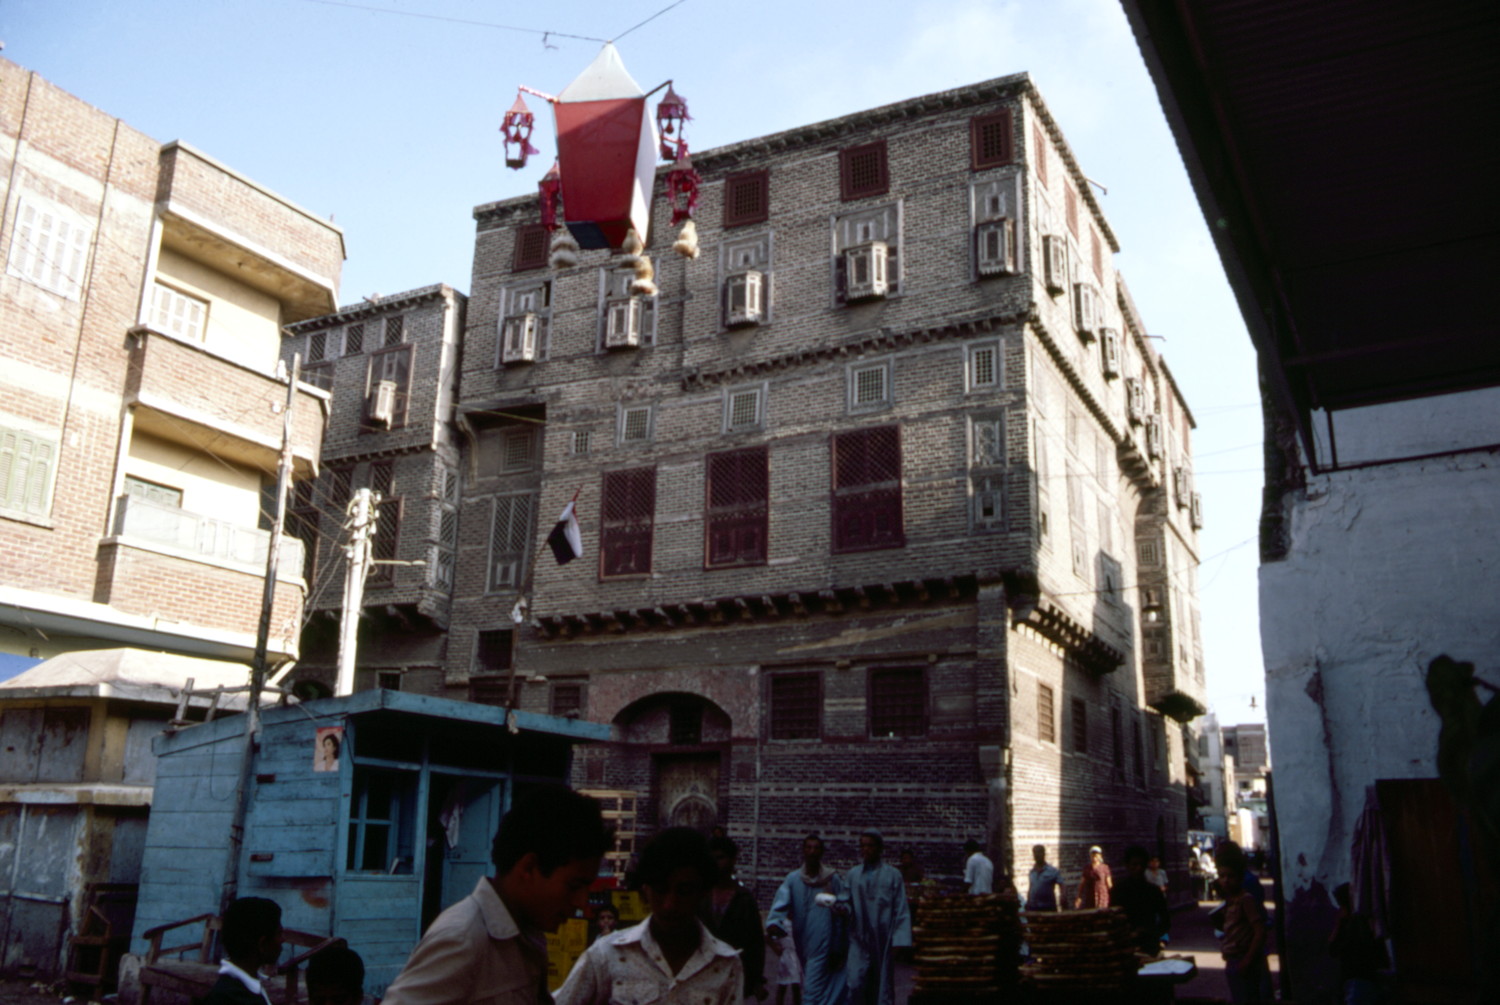 Amasyali House (1808/1223 AH), northwest corner, showing house's situation in streetscape